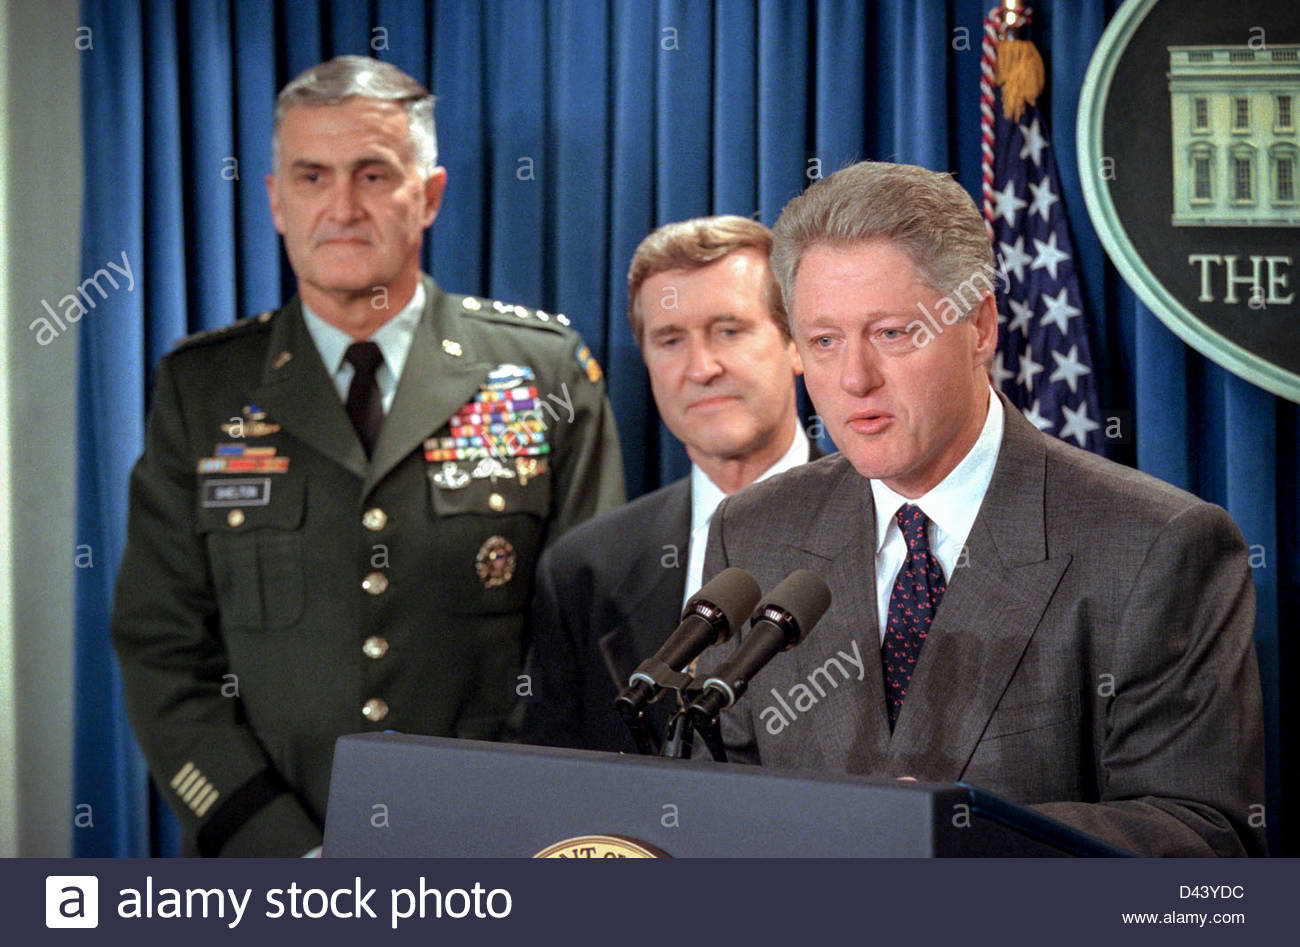 us-president-bill-clinton-makes-a-statement-in-the-briefing-room-of-D43YDC.jpg